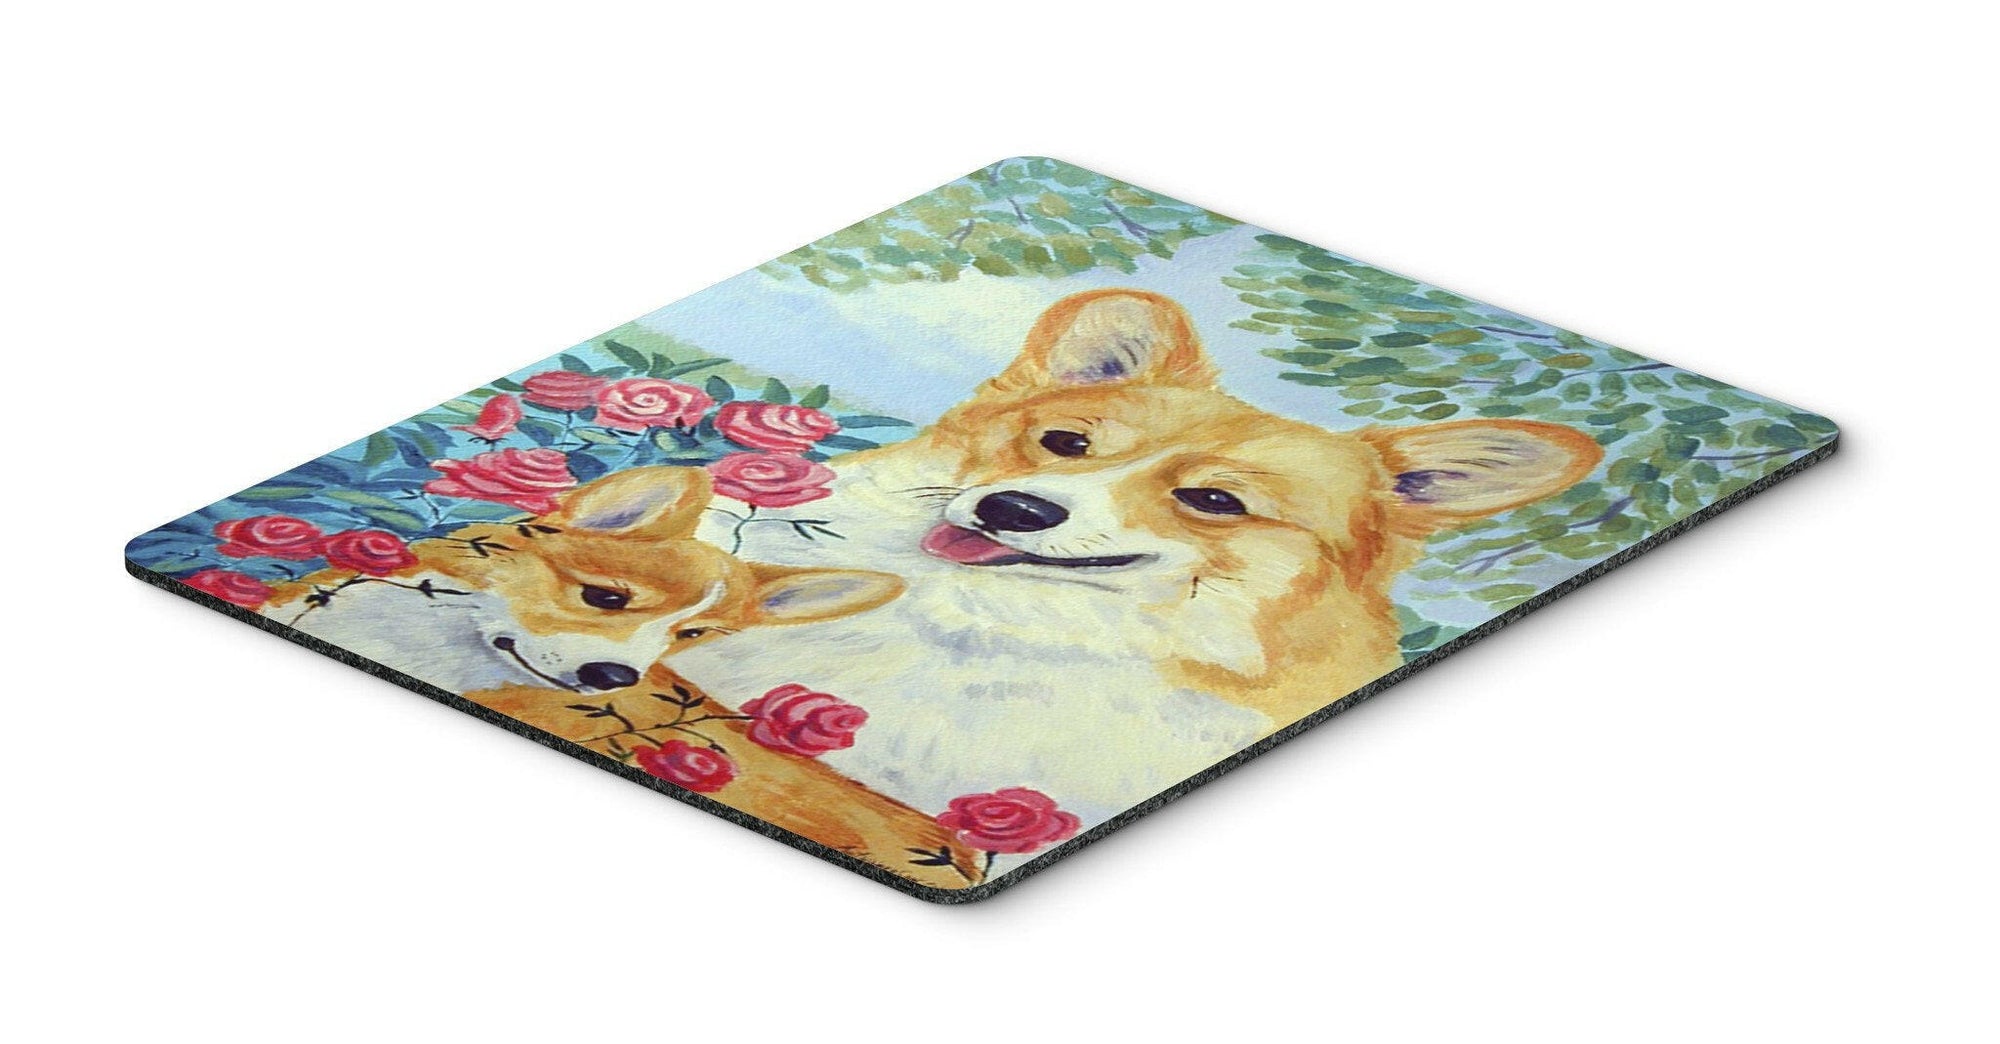 Corgi Momma's Love and Roses Mouse Pad, Hot Pad or Trivet by Caroline's Treasures